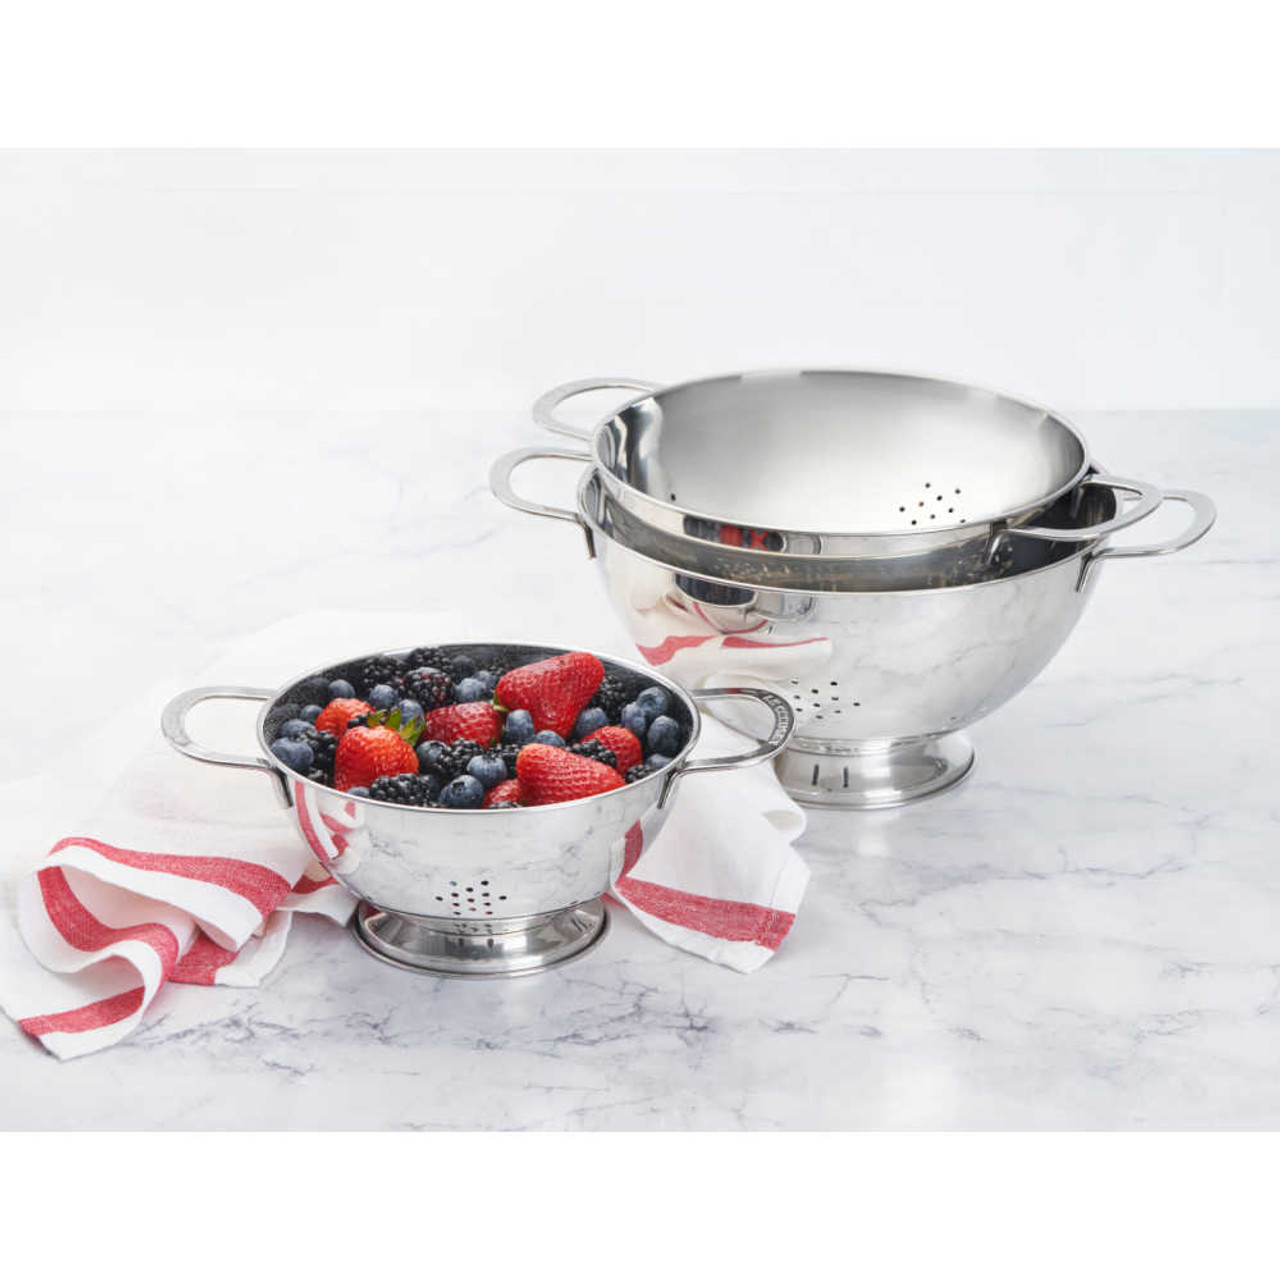 New OXO Good Grips Stainless Steel Colander Stainer Set - 5 Quart